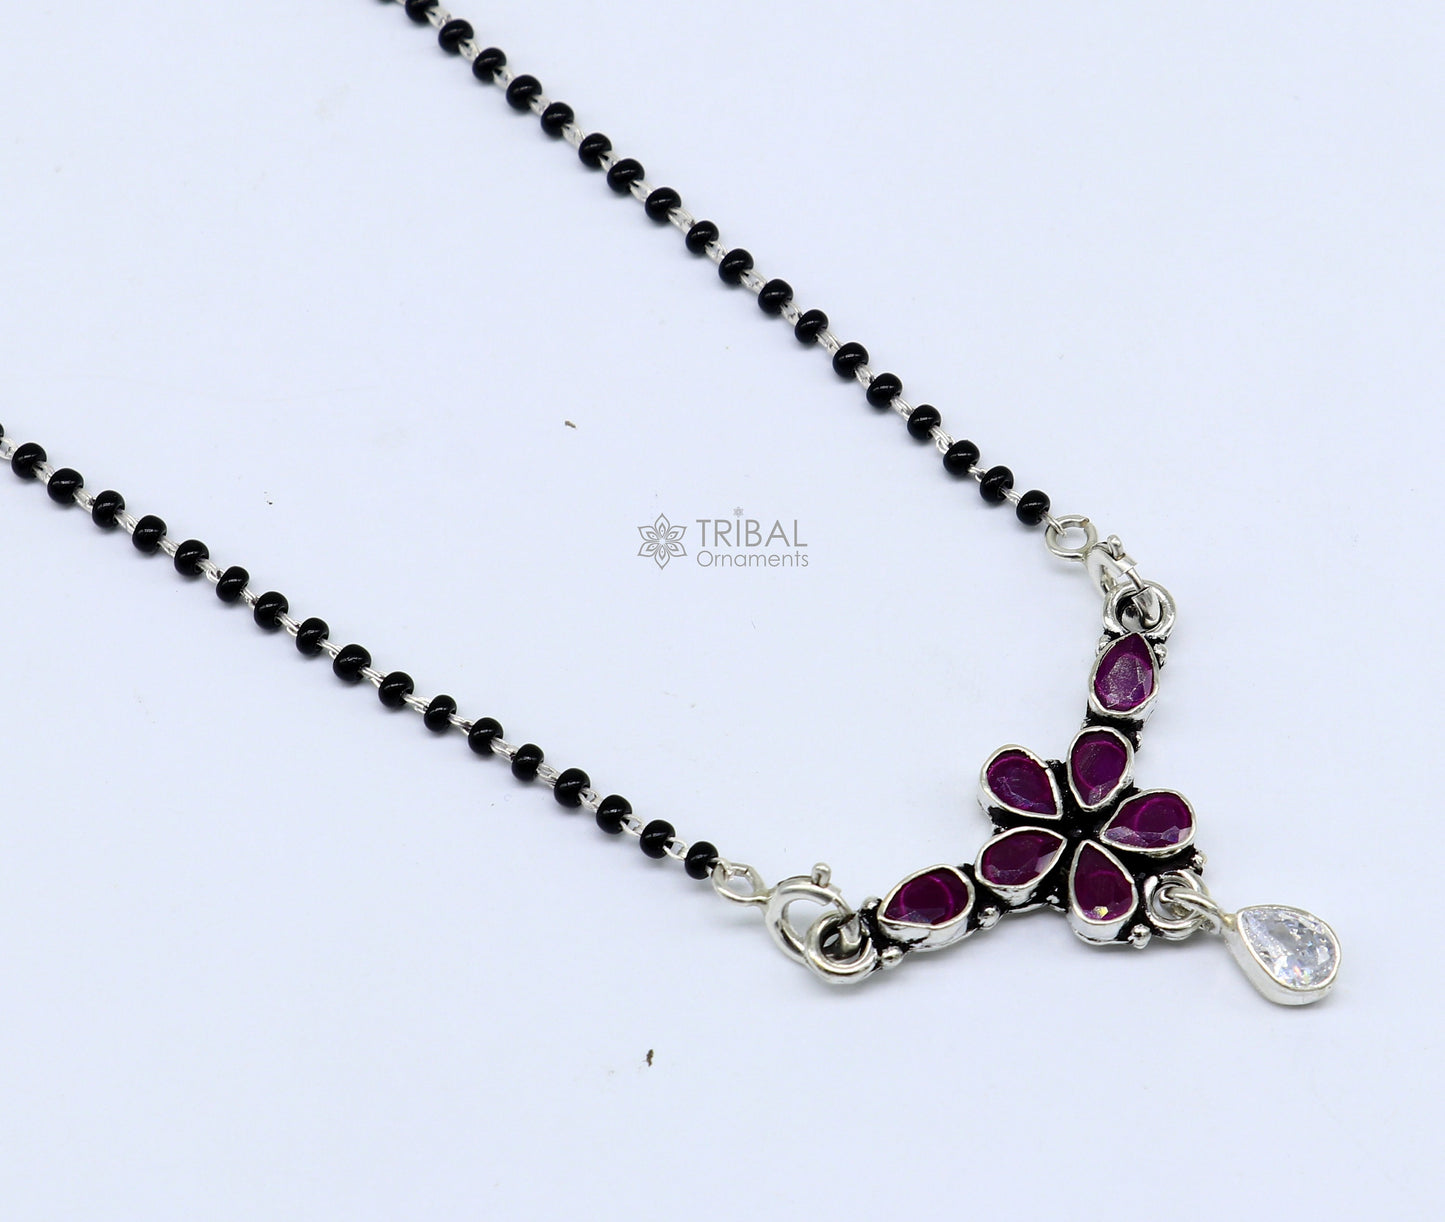 2.2mm small black beaded 925 sterling silver color cut stone mangalsutra flower shape pendant, best women's girl's gifting jewelry ms33 - TRIBAL ORNAMENTS